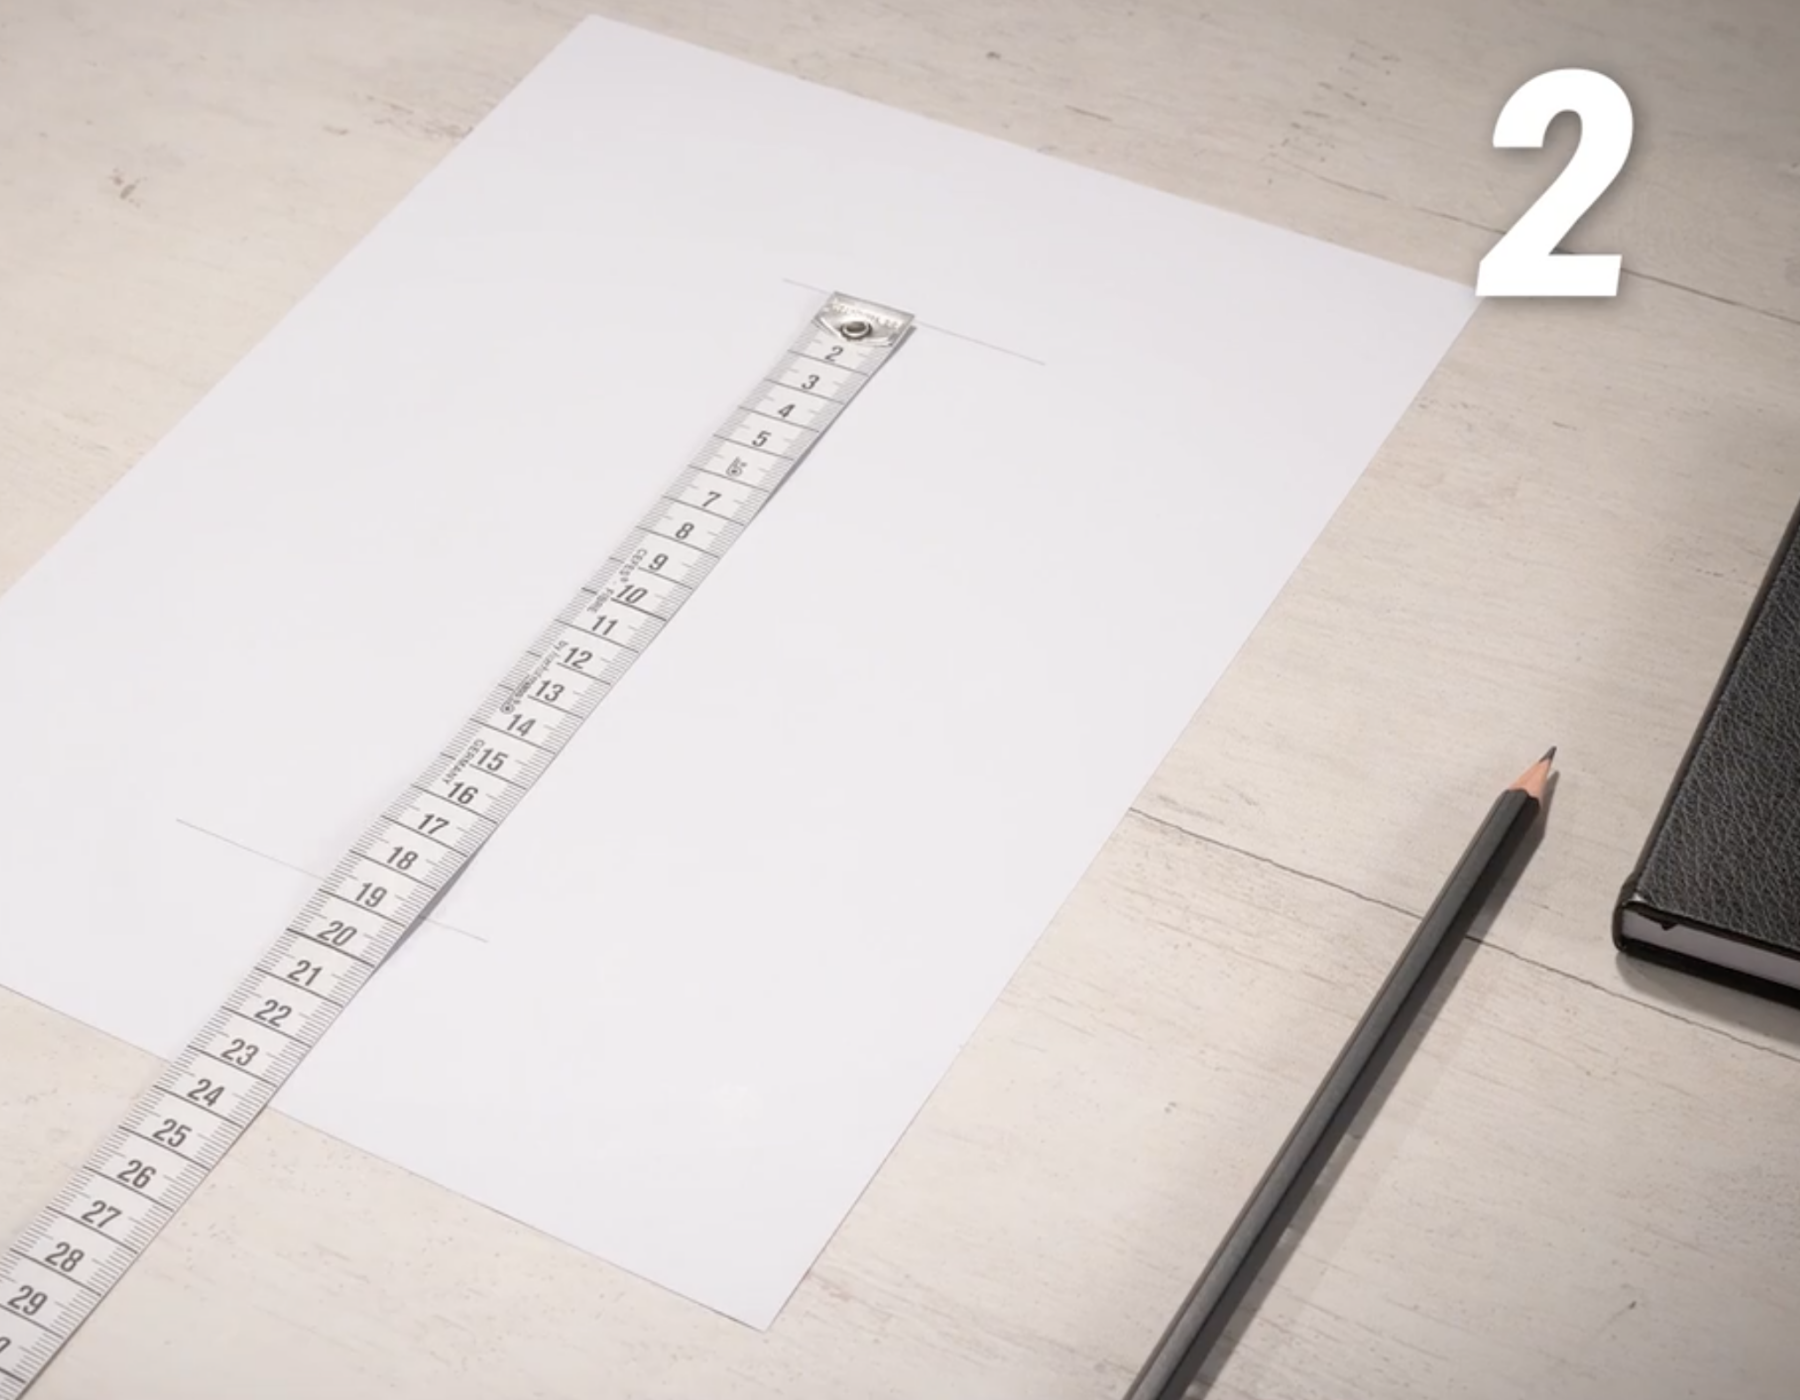 Measure the length of the hand with a ruler.